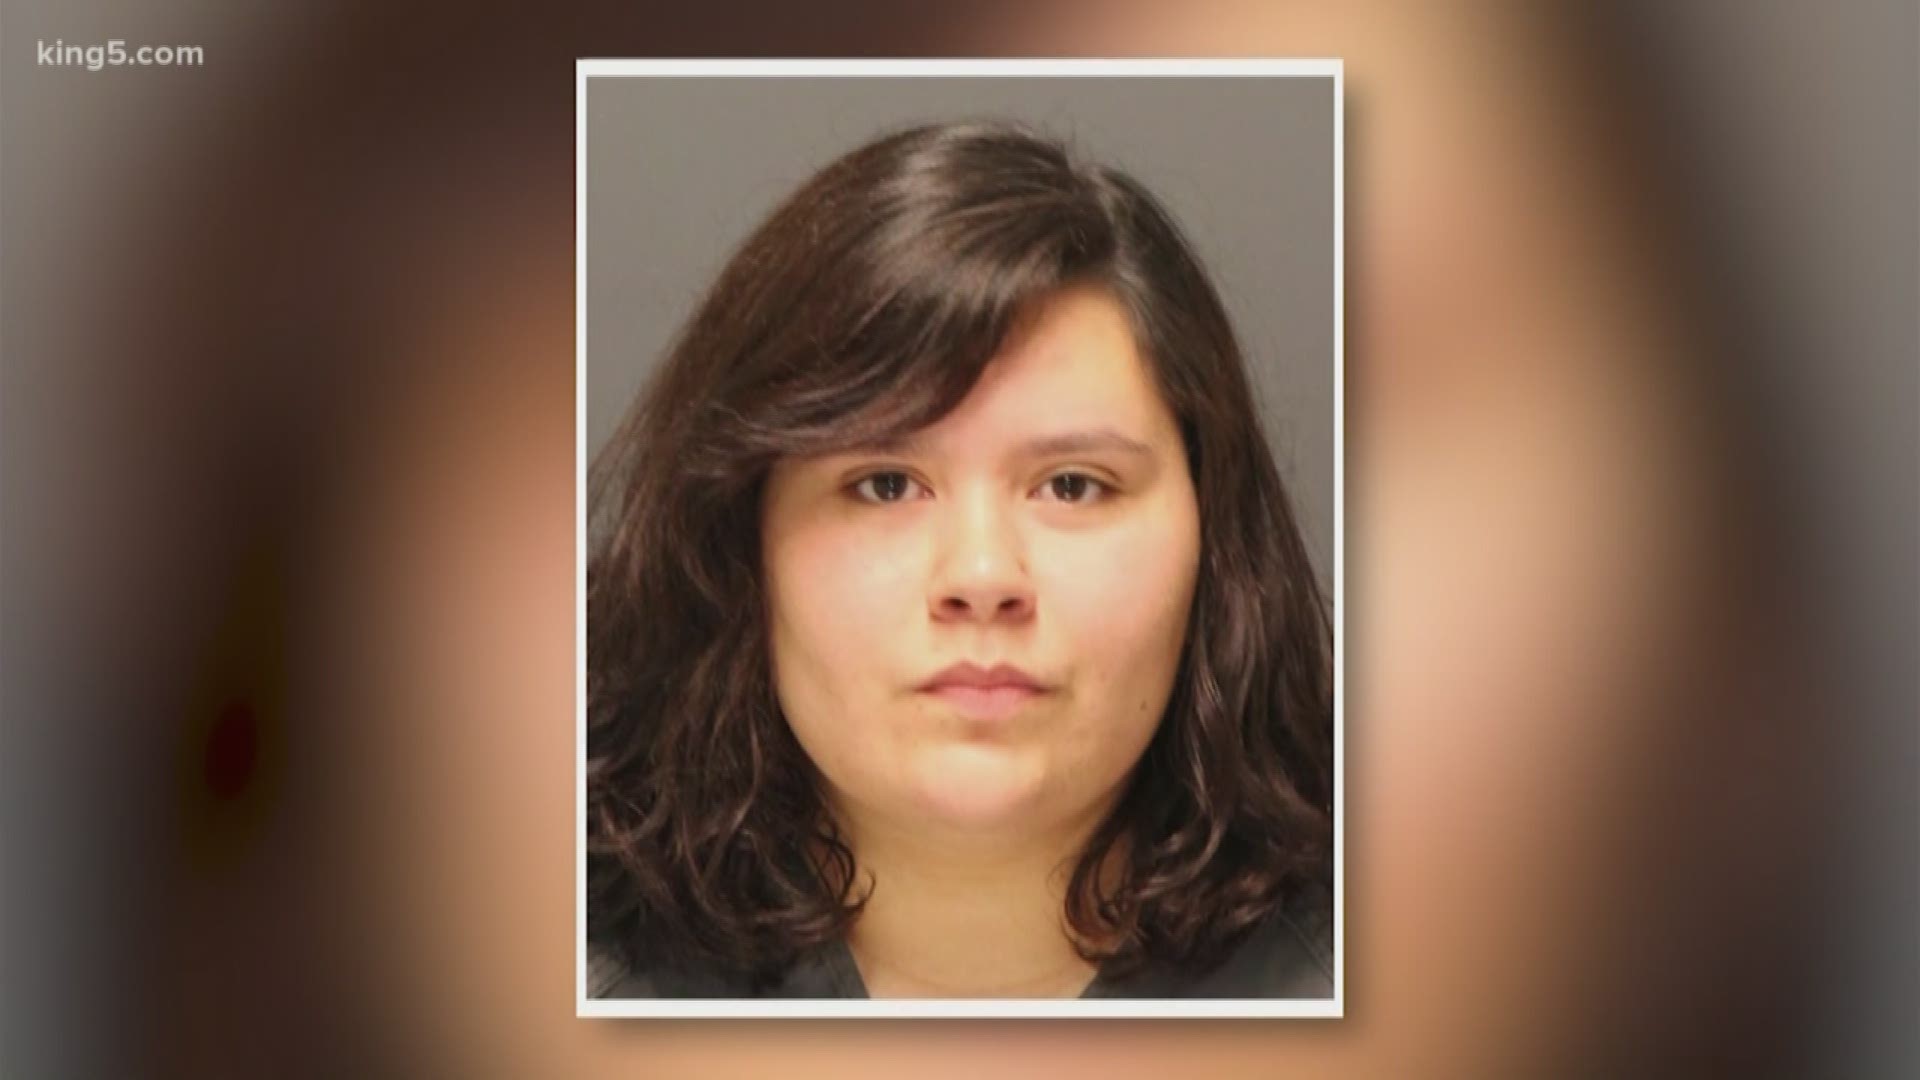 Pierce County babysitter faces child pornography charges king5 image